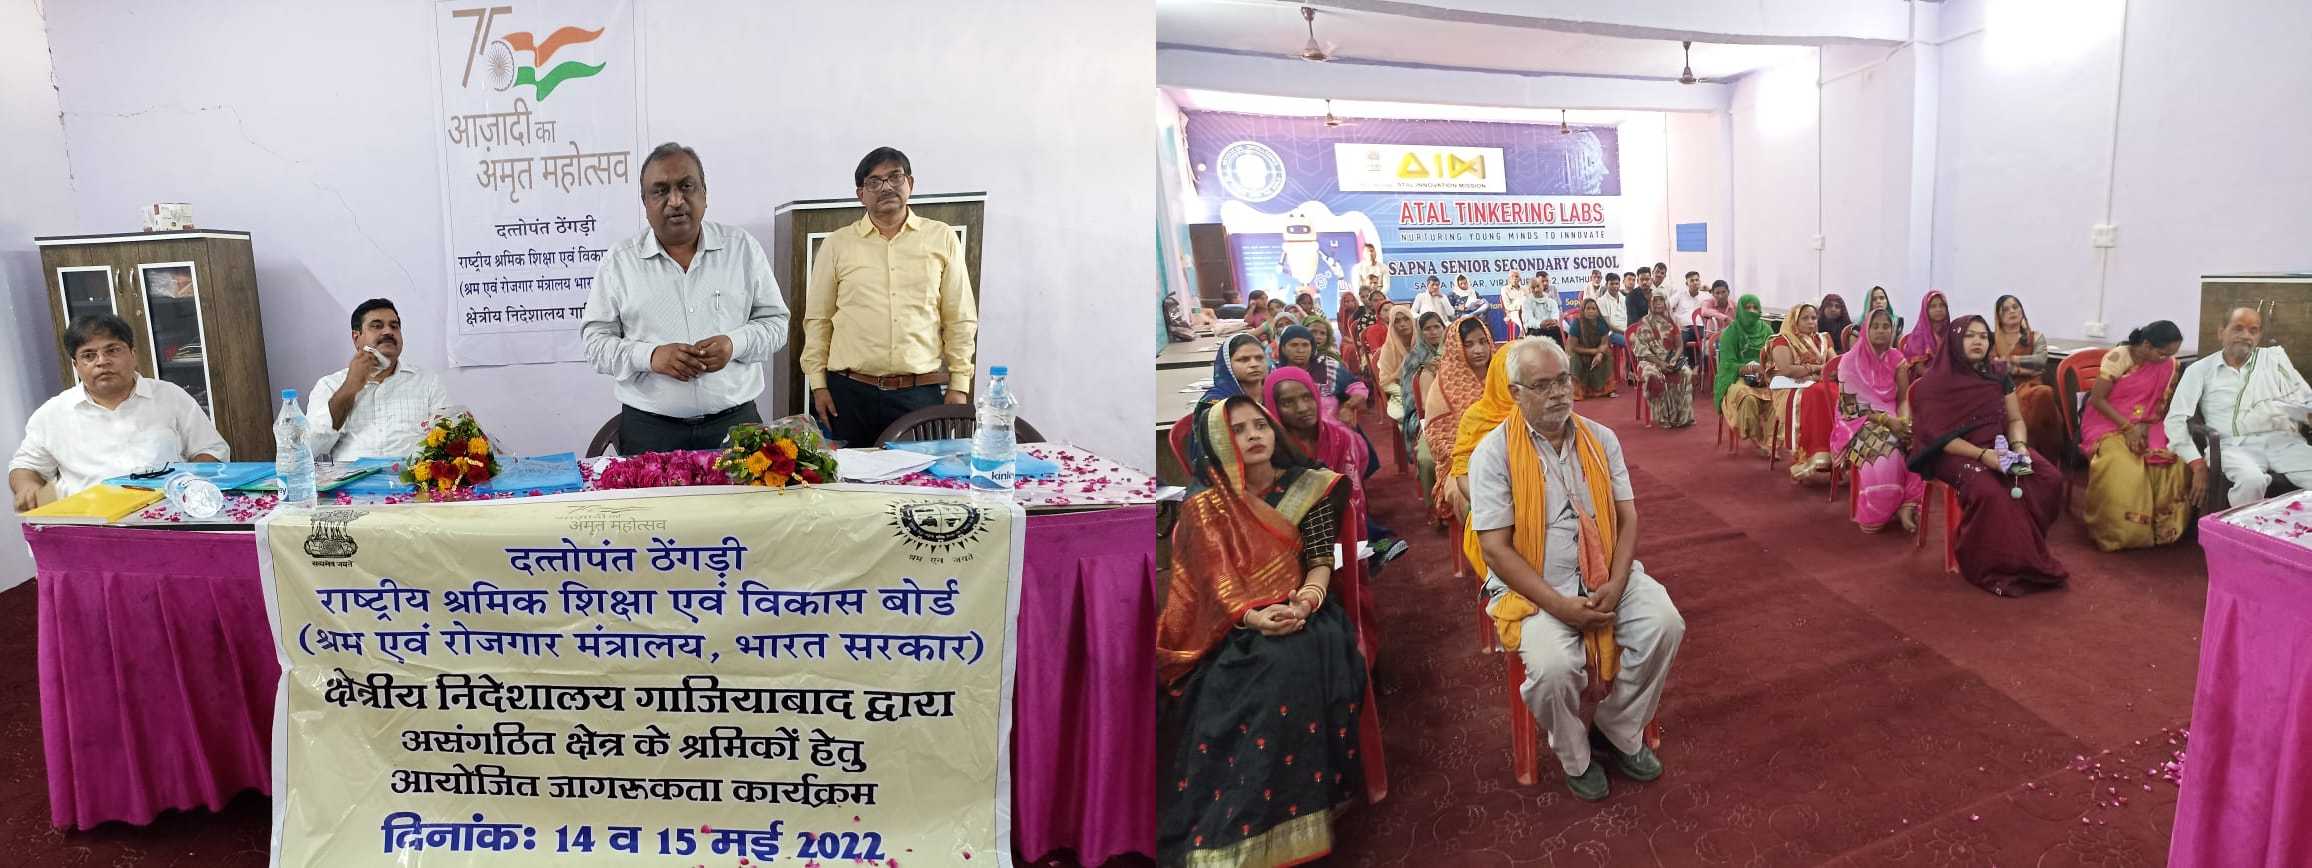 
<p>Dr. Shashank Goel, IAS, Additional Secretary, MoL&amp;E interacted with participants of Unorganized workers at Mathura, UP &amp; encouraged to take benefits of flagship schemes of Government. Training was organized by DTNBWED, Ghaziabad from 14-15 May, 2022.</p>
 